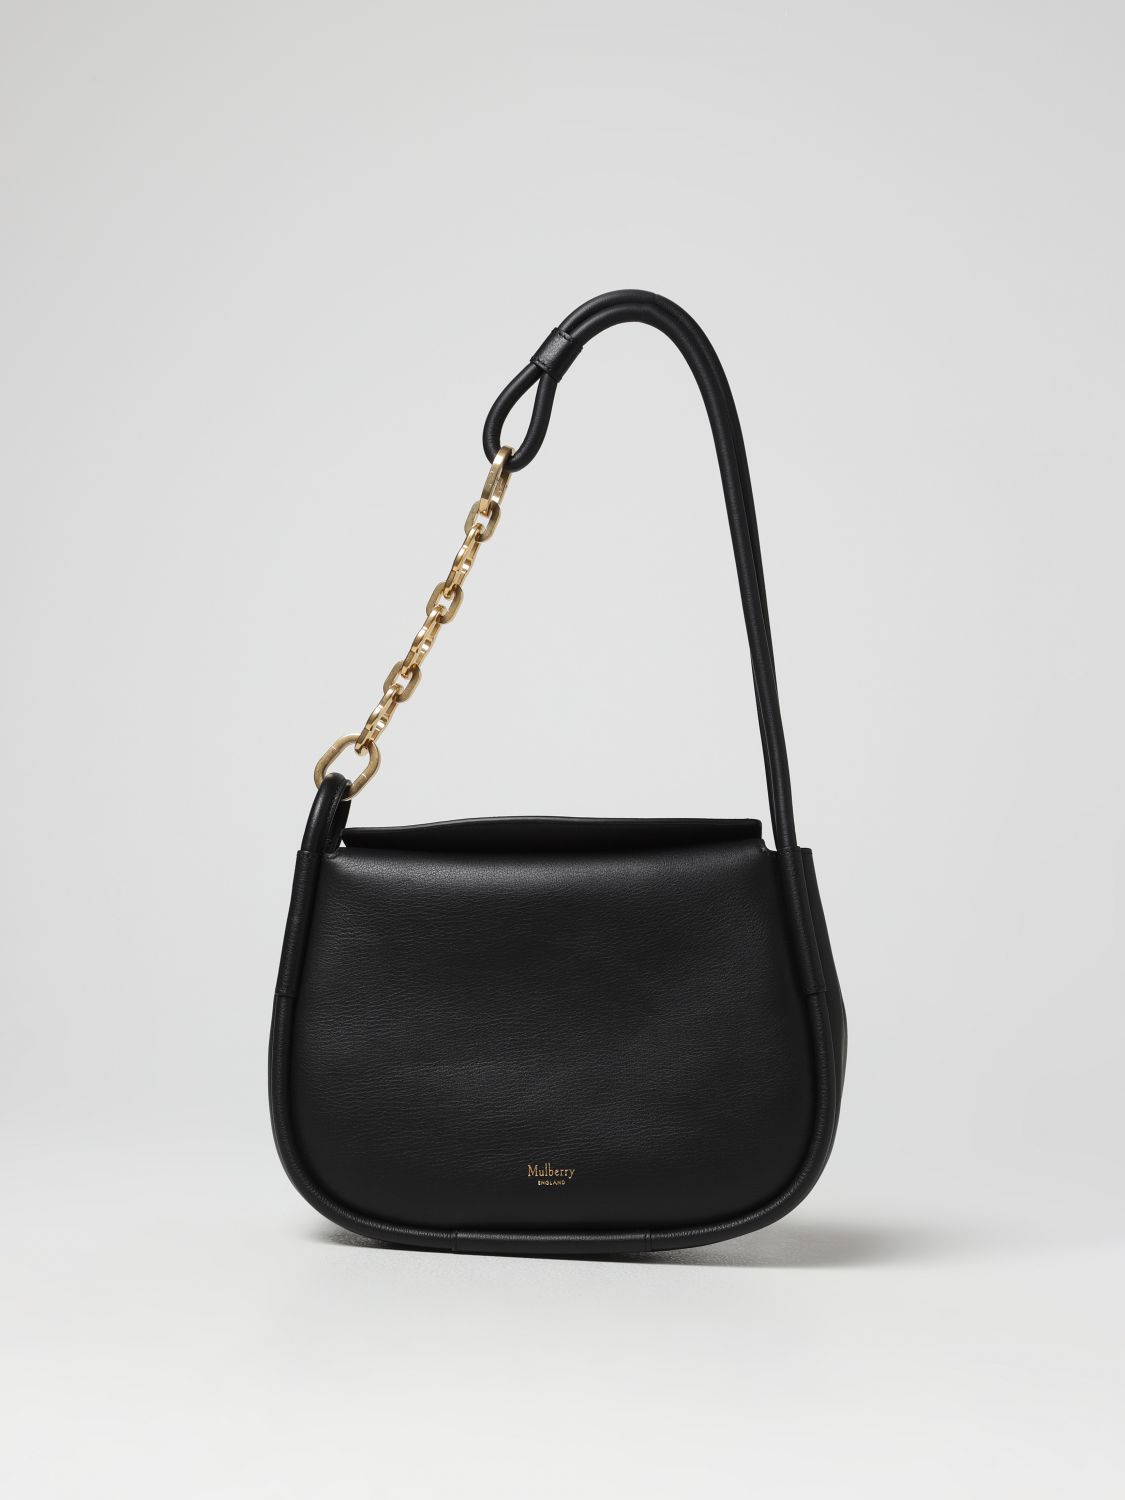 MULBERRY SHOULDER BAG MULBERRY WOMAN,E25625002